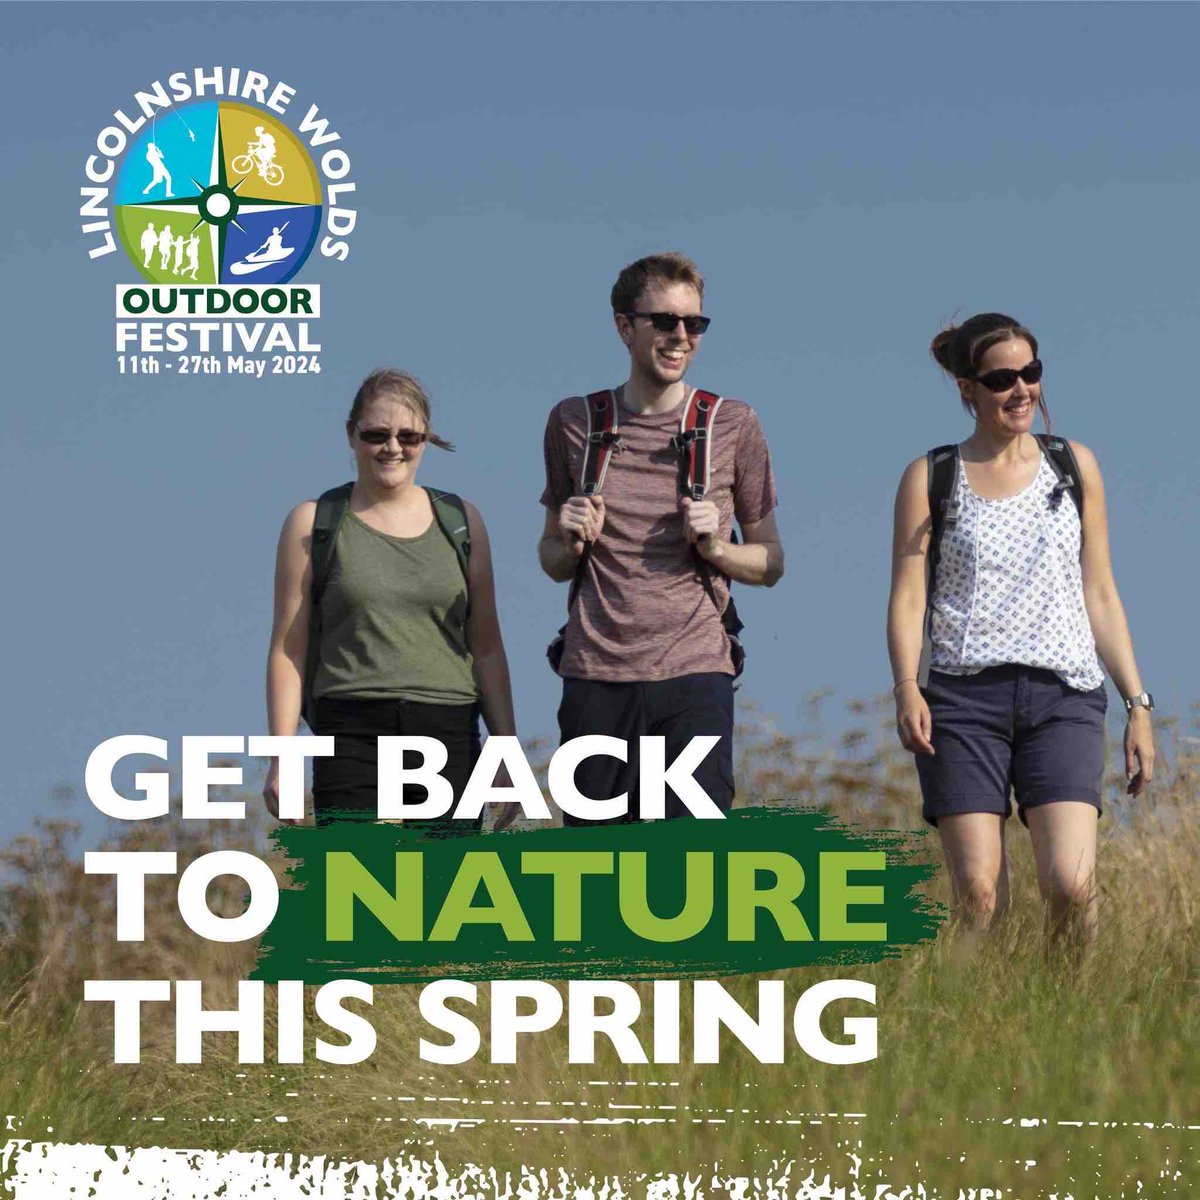 The Lincolnshire Wolds Outdoor Festival is coming to the Wolds from the 11th-27th May! 🚶‍♂️🌳

The festival features a packed programme of over 100 different walks/activities for you to enjoy.

🔗 woldsoutdoorfestival.com

@visitlincoln @visitlincolnshire @westlindseydc